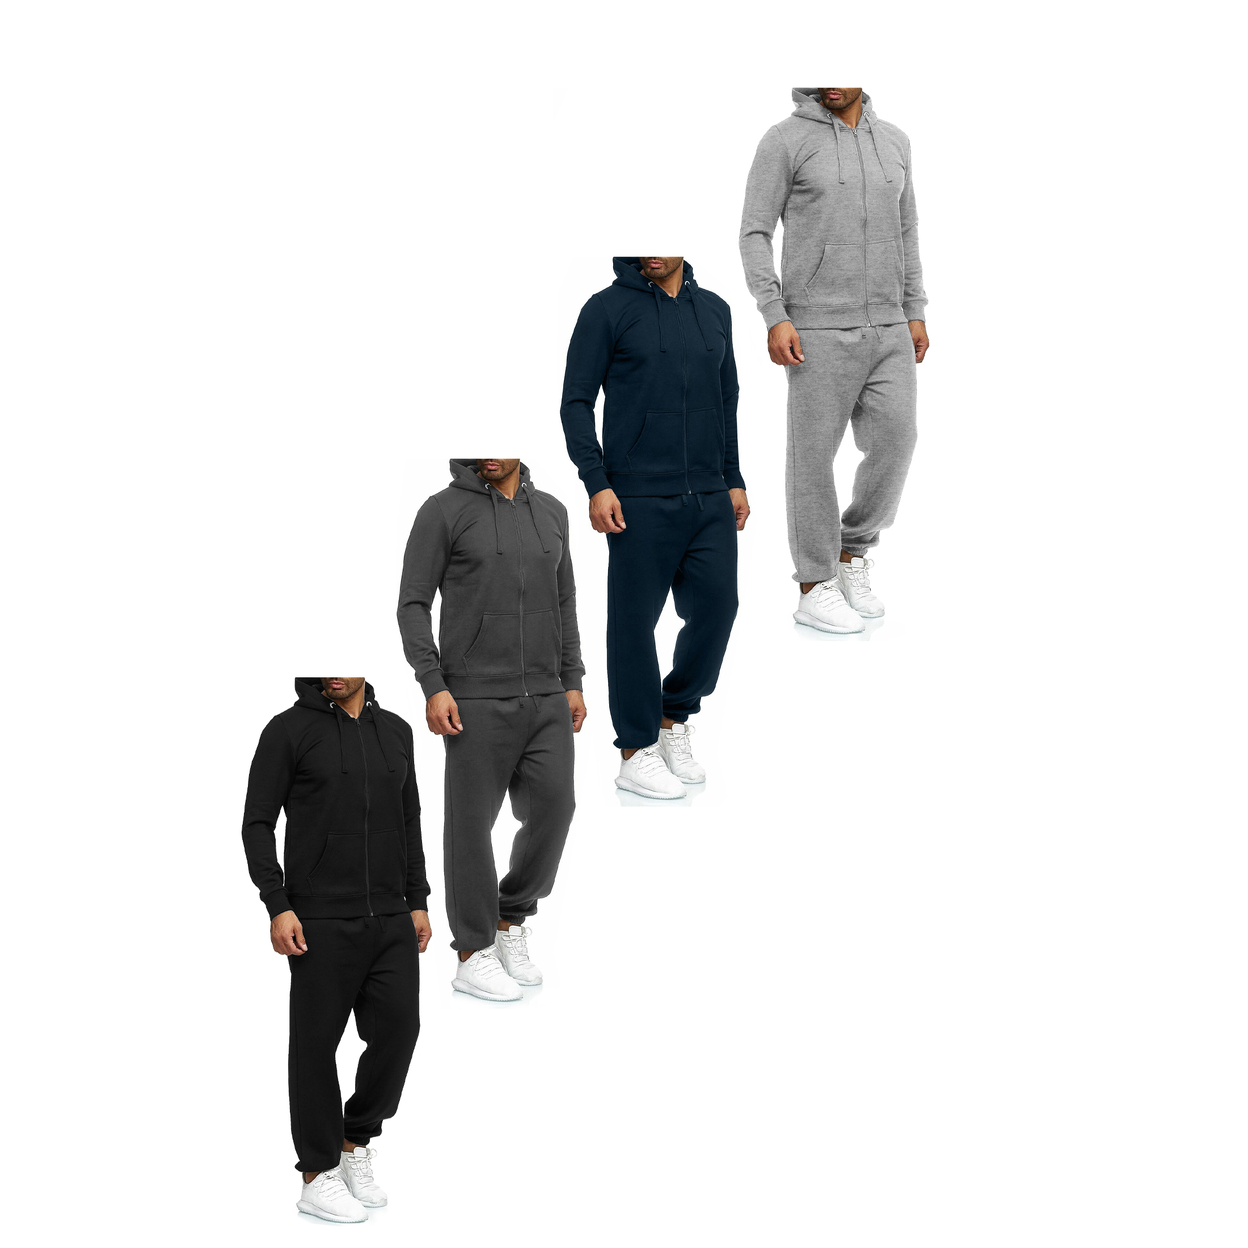 Multi-Pack: Men's Casual Big & Tall Athletic Active Winter Warm Fleece Lined Full Zip Tracksuit Jogger Set - Navy, 2-pack, 3xl